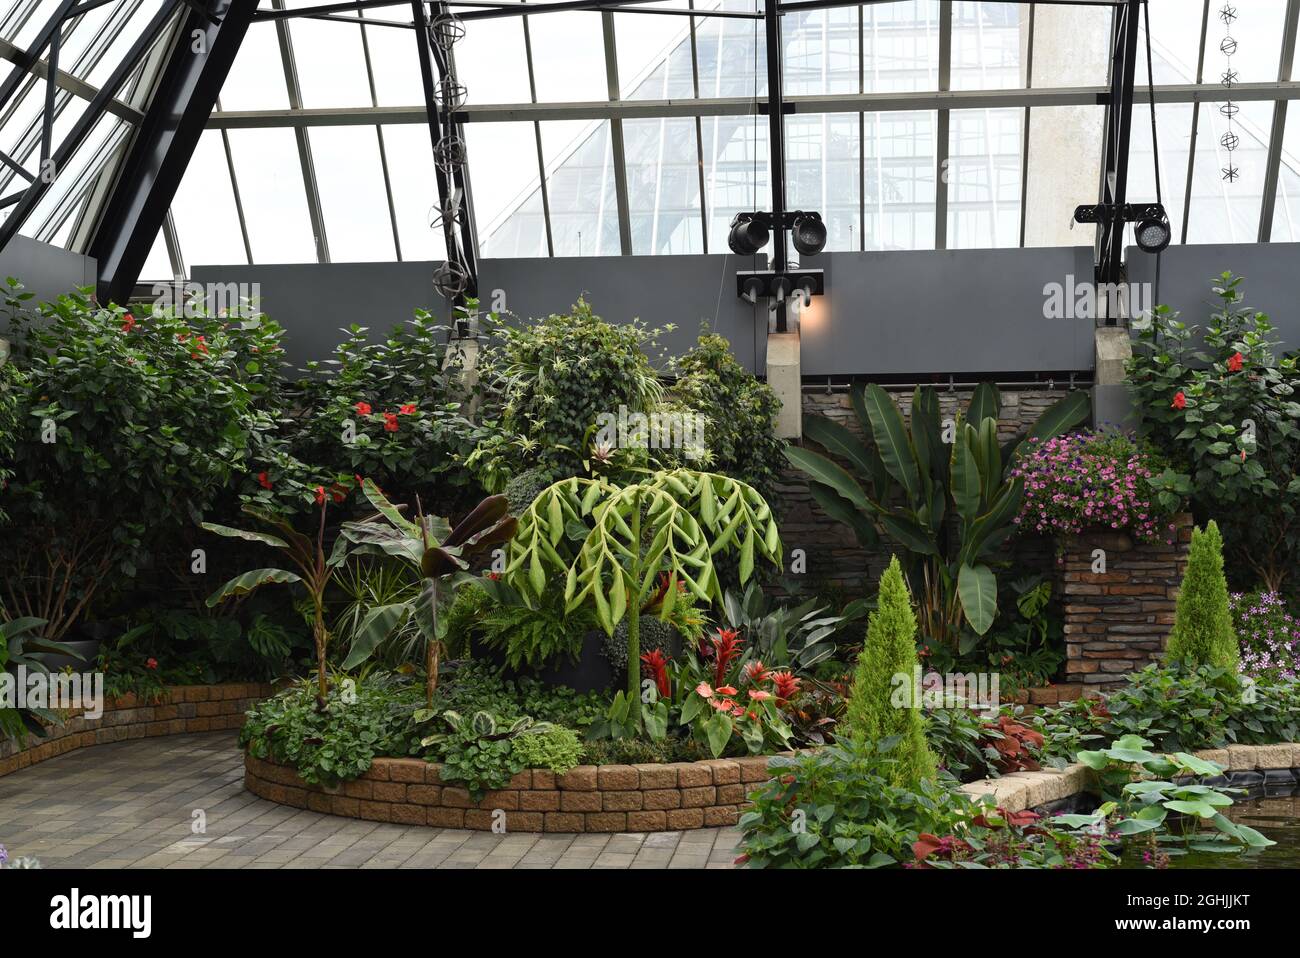 A display of flowers, plants and shrubs in the Muttart Conservatory botanical gardens and horticultural centre in Edmonton, Alberta, Canada. Stock Photo